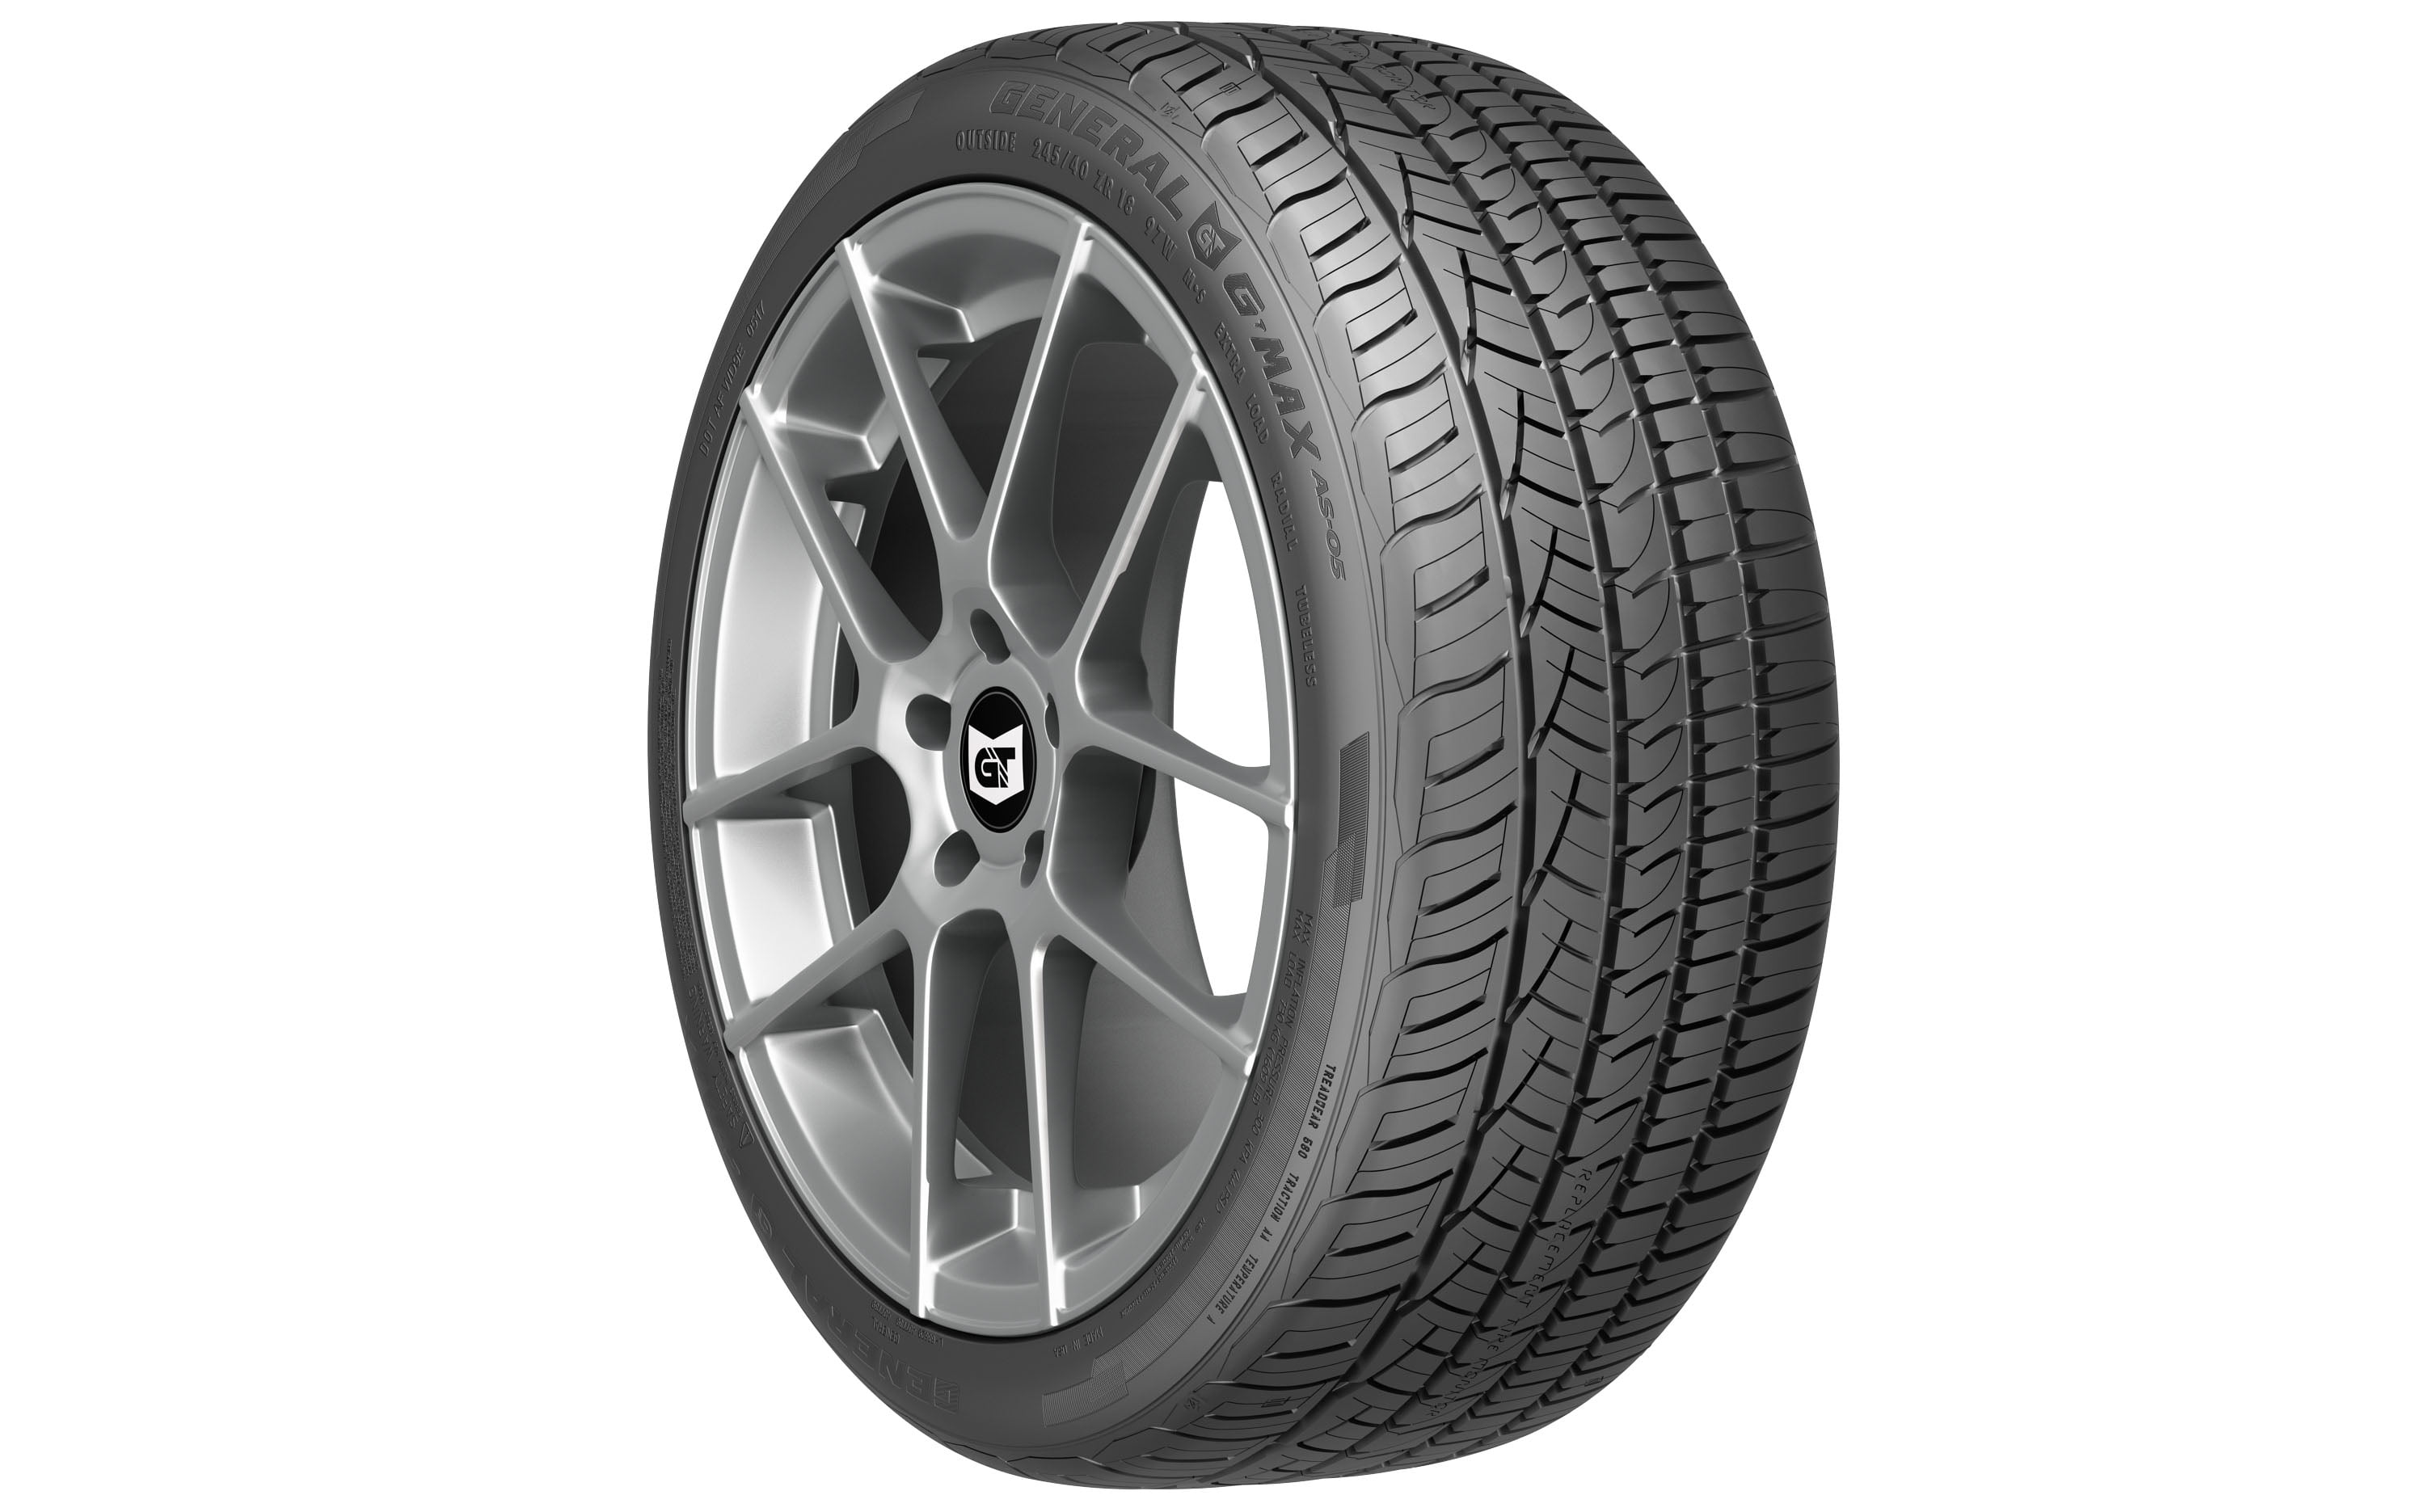 General g-max as-05 P265/40R22 106W bsw all-season tire Fits: 2009-14 Ford  Edge Sport, 2013-15 Lincoln MKX Base